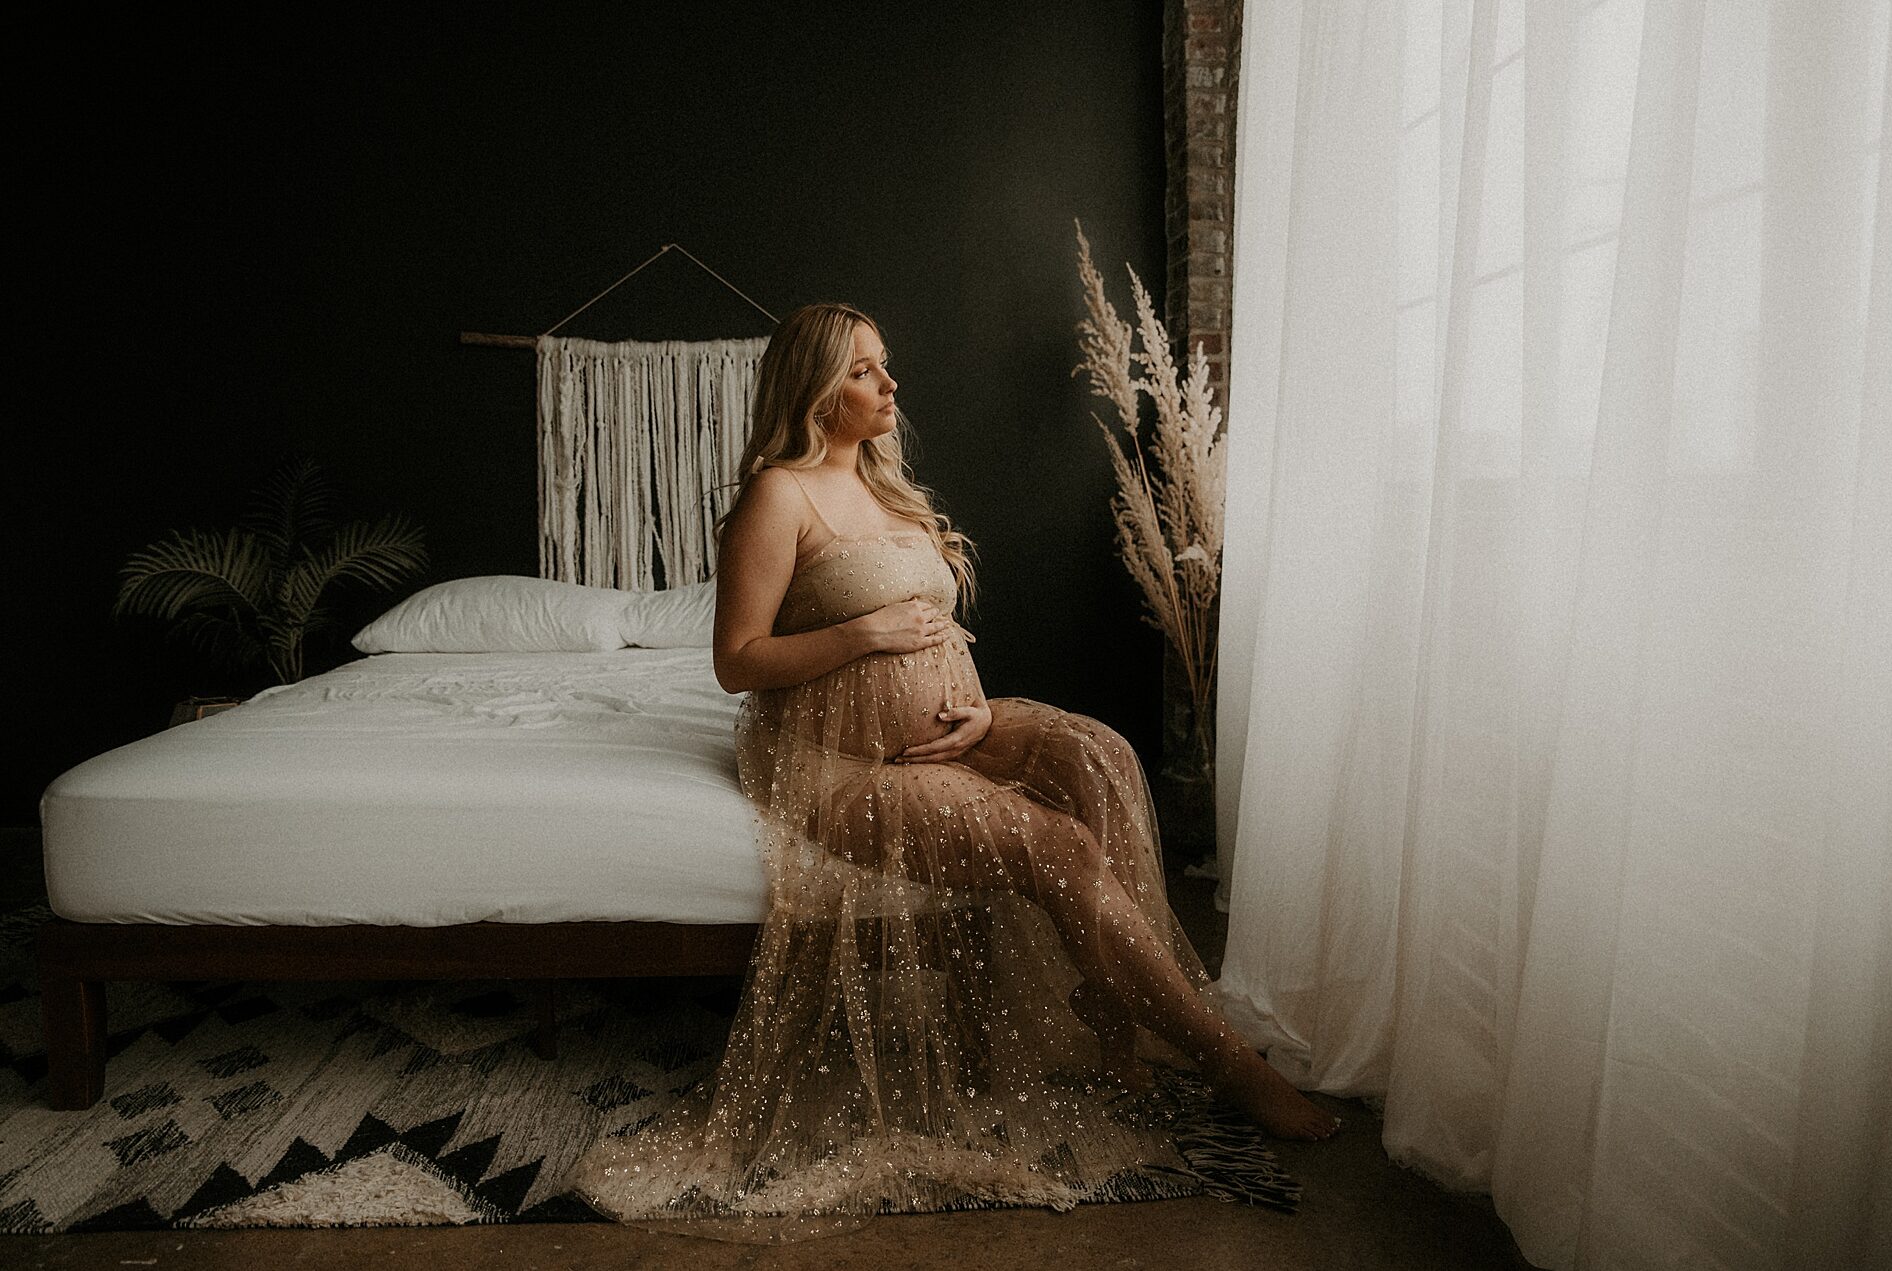 Indoor maternity studio session in St Louis macrame, persian rug, brick and black wall. Expecting mother sitting on bed holding her belly